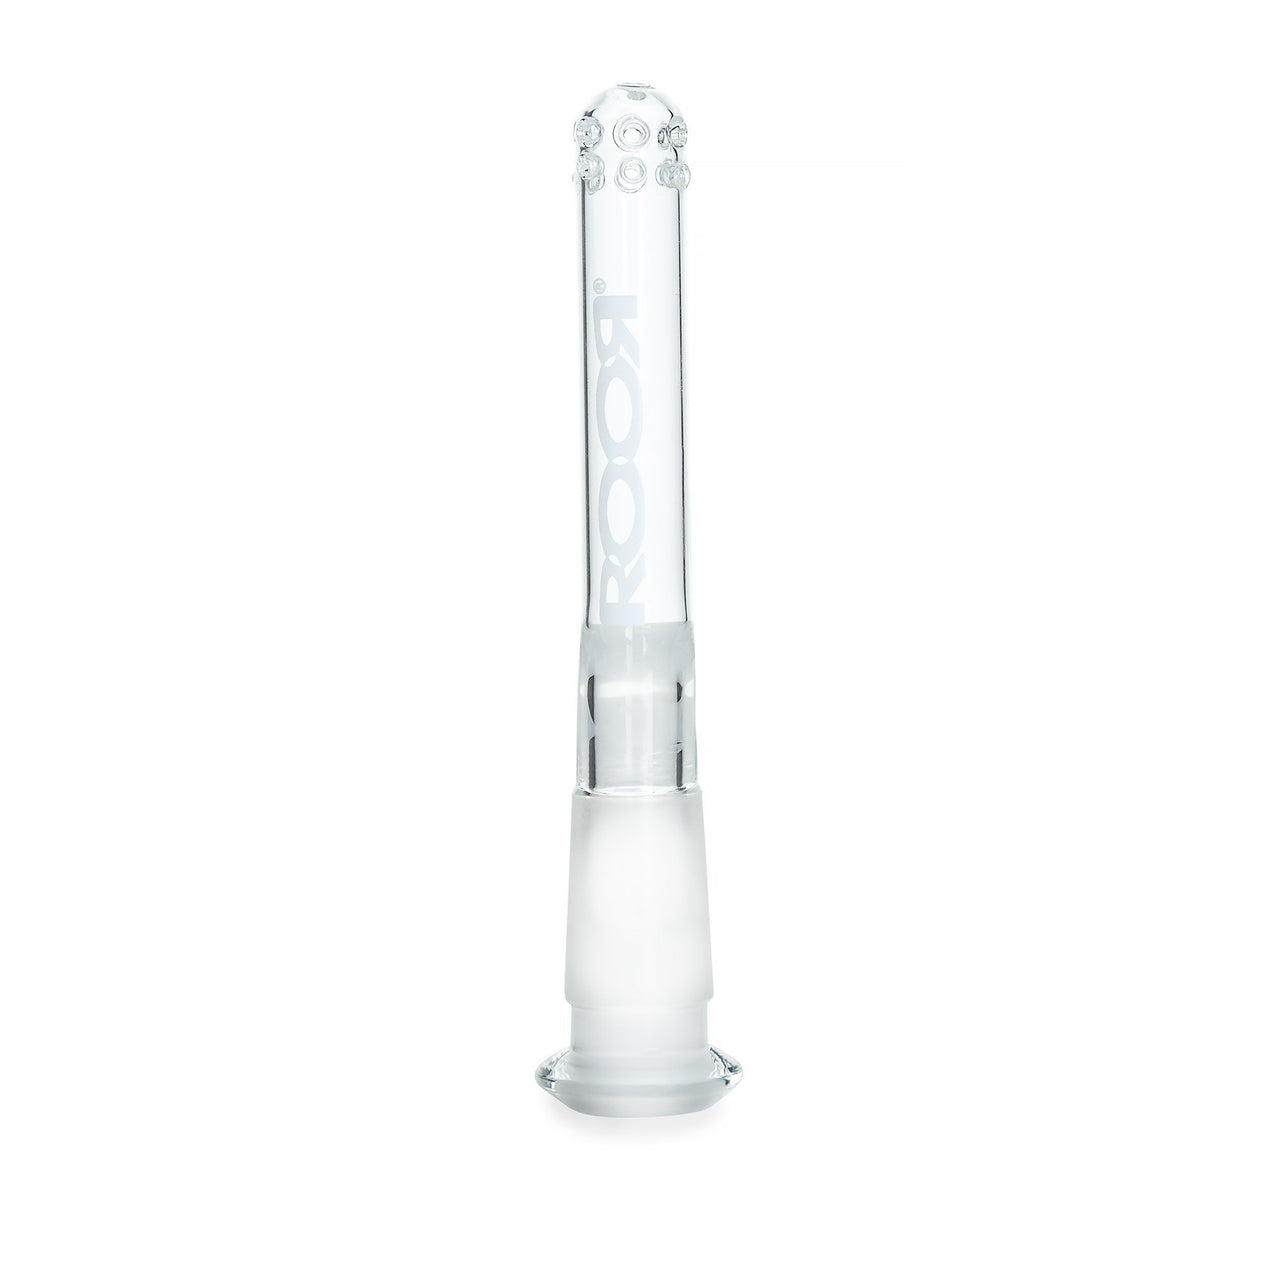 ROOR 18/14mm Low Profile 13-Hole Diffused Downstem - 420 Science - The most trusted online smoke shop.